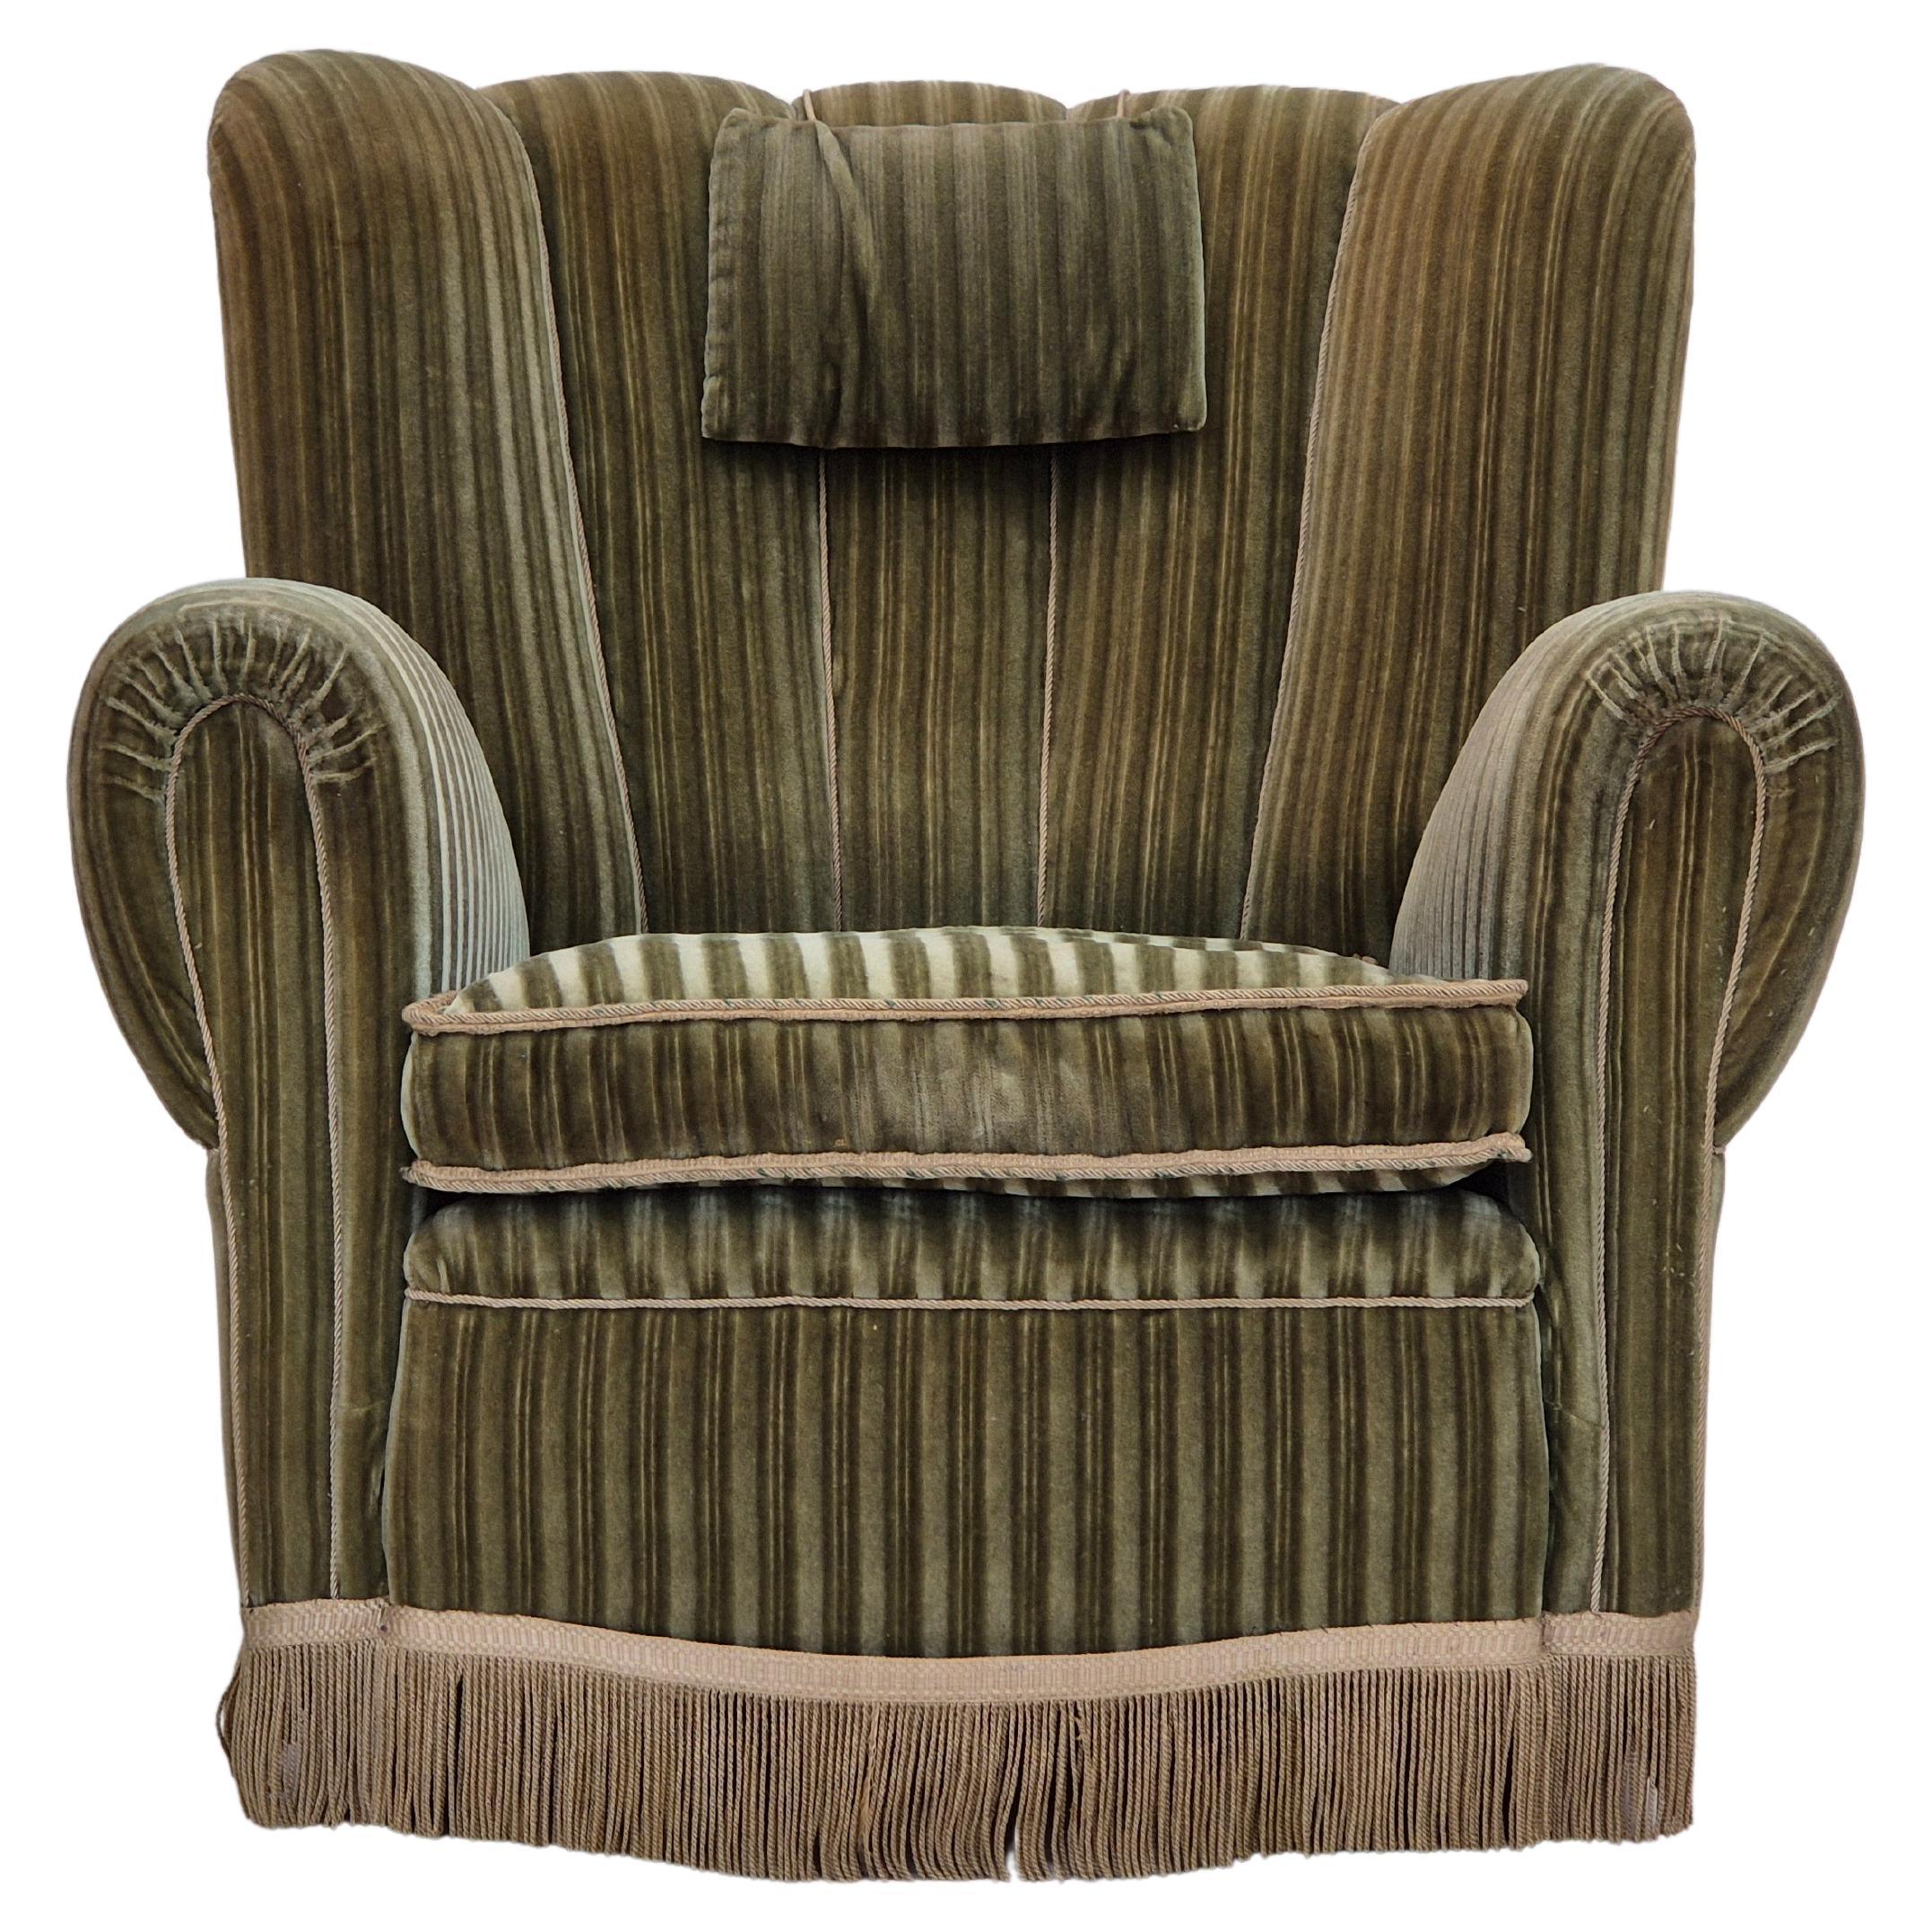 1960s, Danish relax armchair, original condition, green furniture velour. For Sale